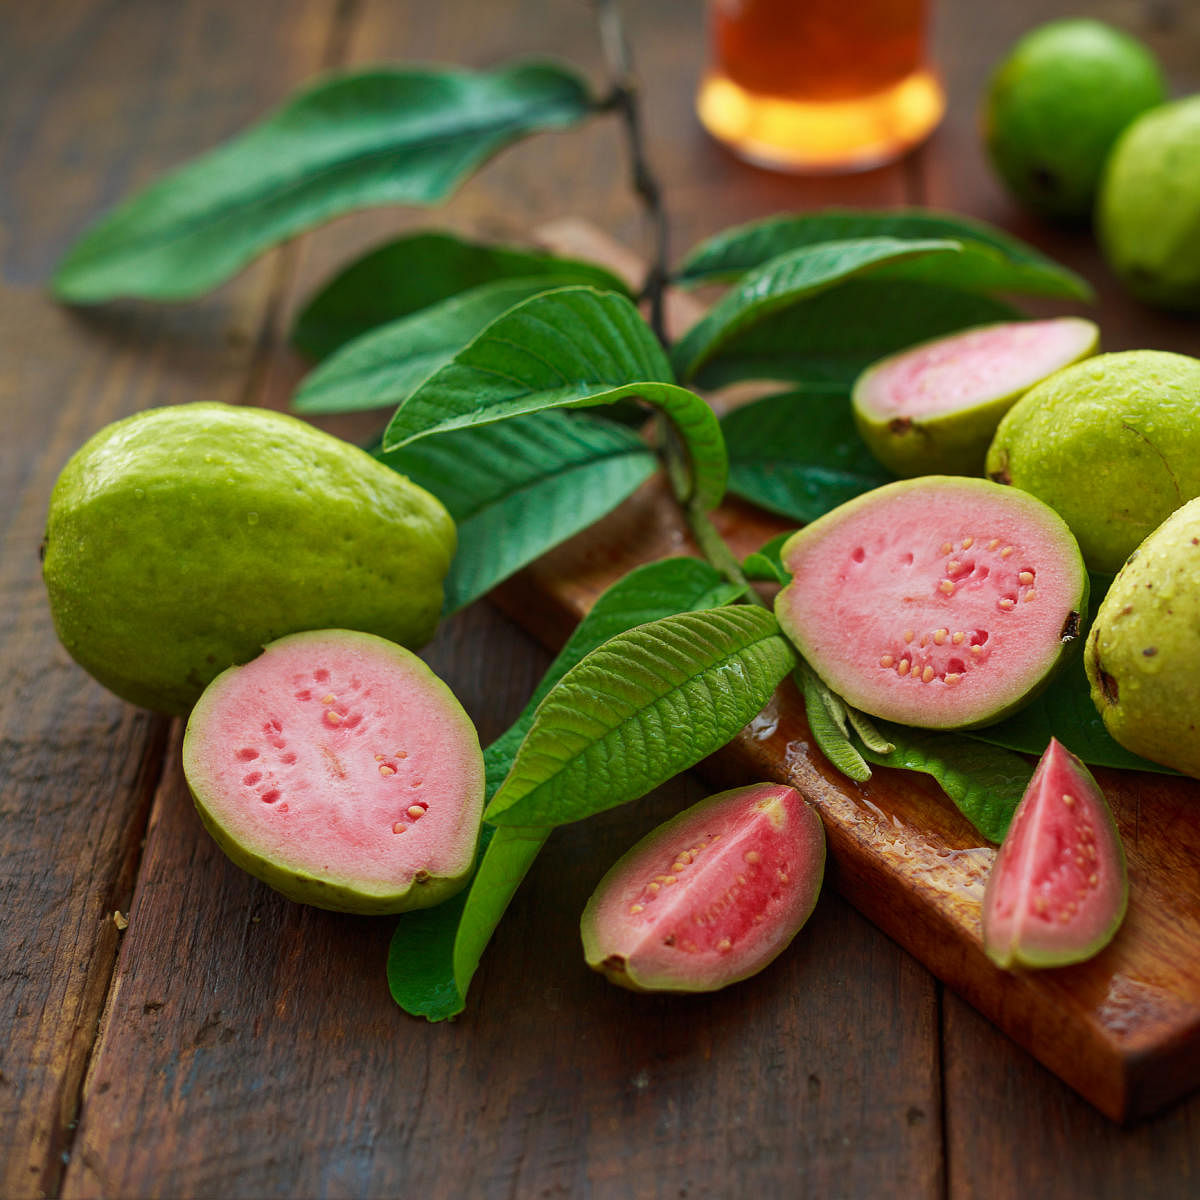 Guava leaves are enriched with antioxidants that fight free radicals, the reason behind the appearance of wrinkles on your skin.